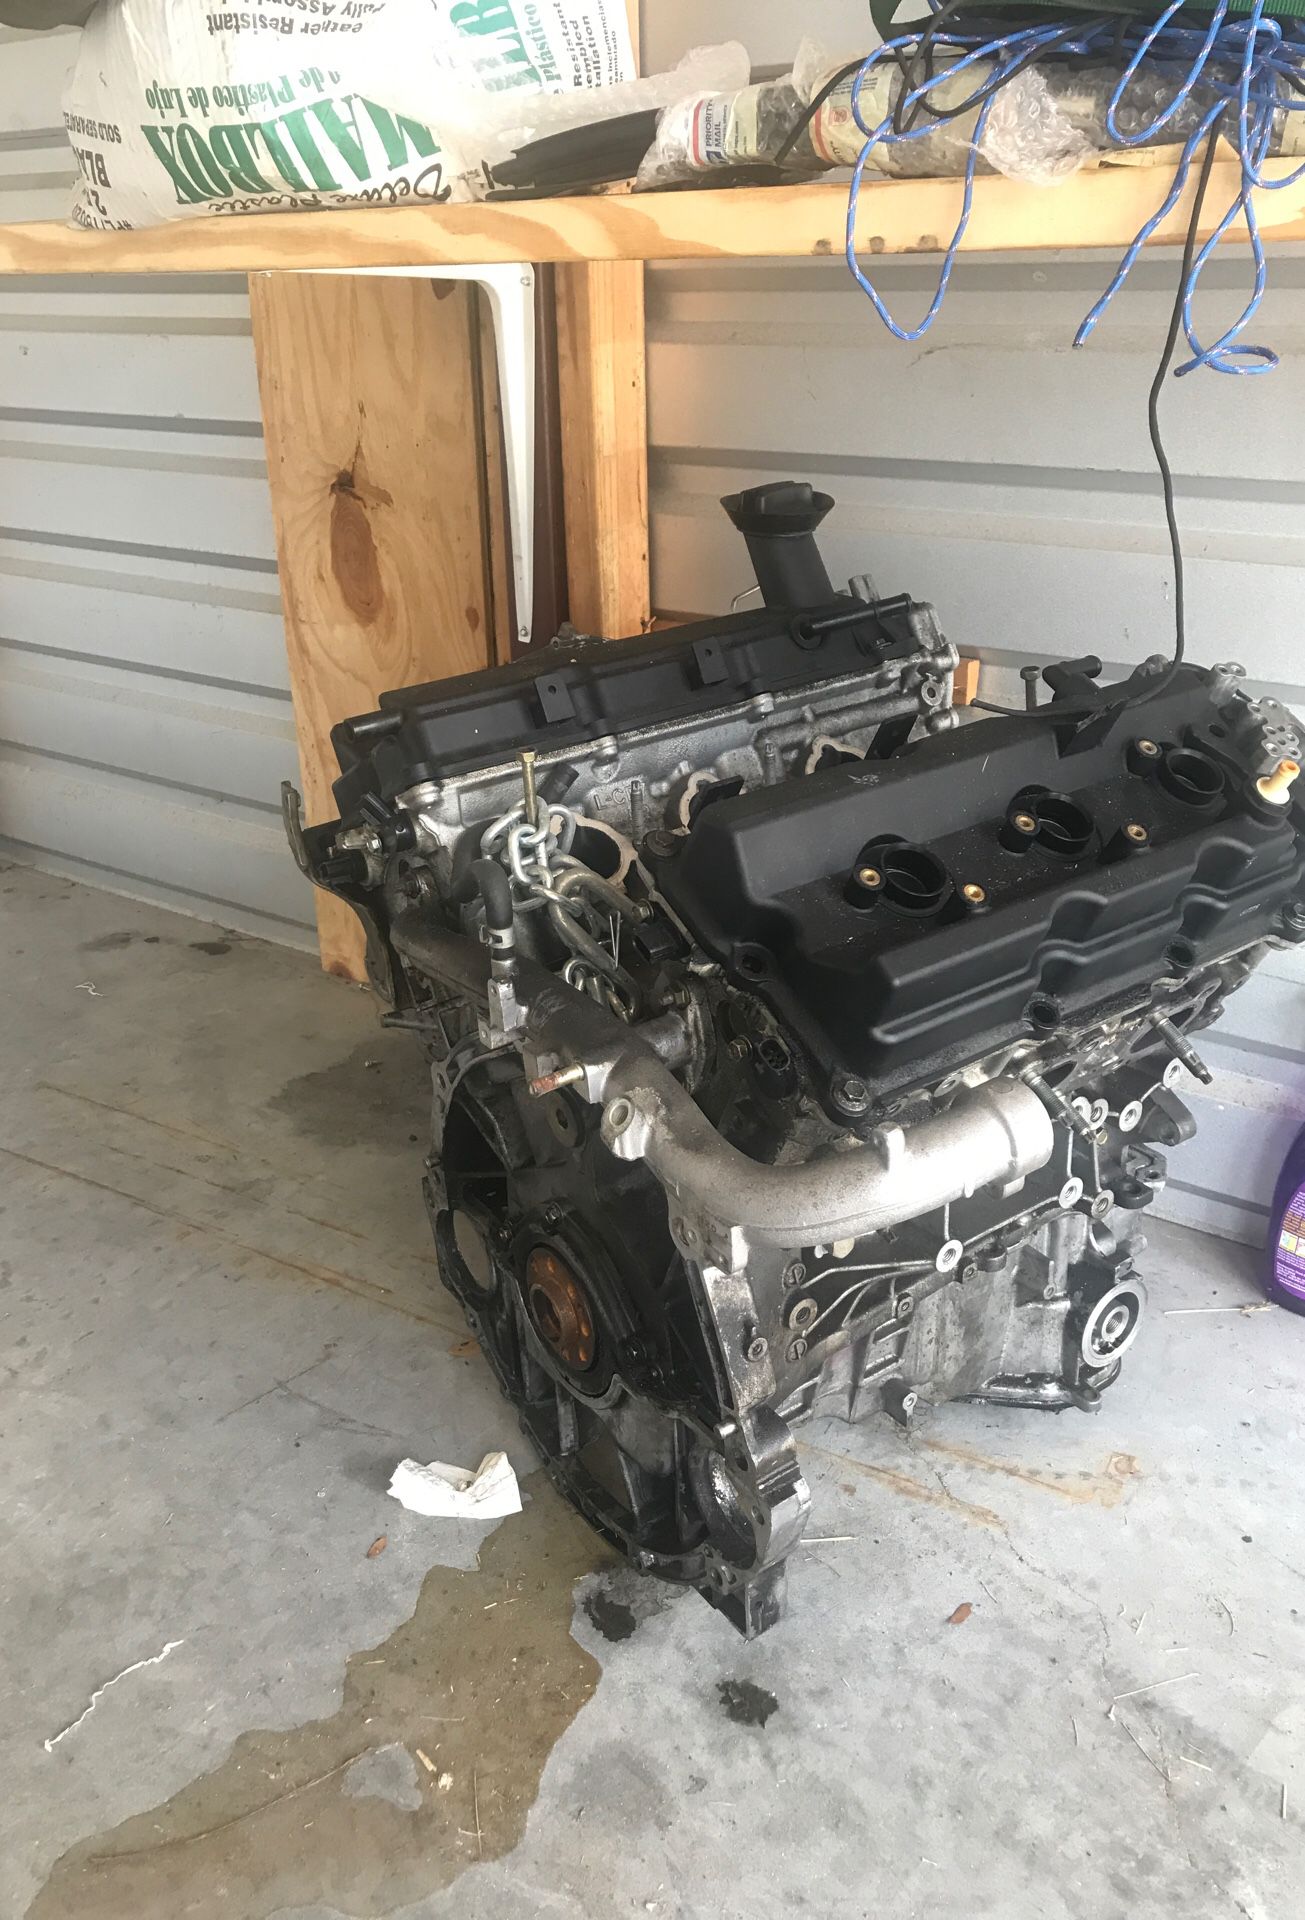 G35 motor - Infiniti 3.5L VQ35DE (revup) ALSO free Plenum And Air Intake Included W/ New Gaskets ALSO $150 Takes It ALL